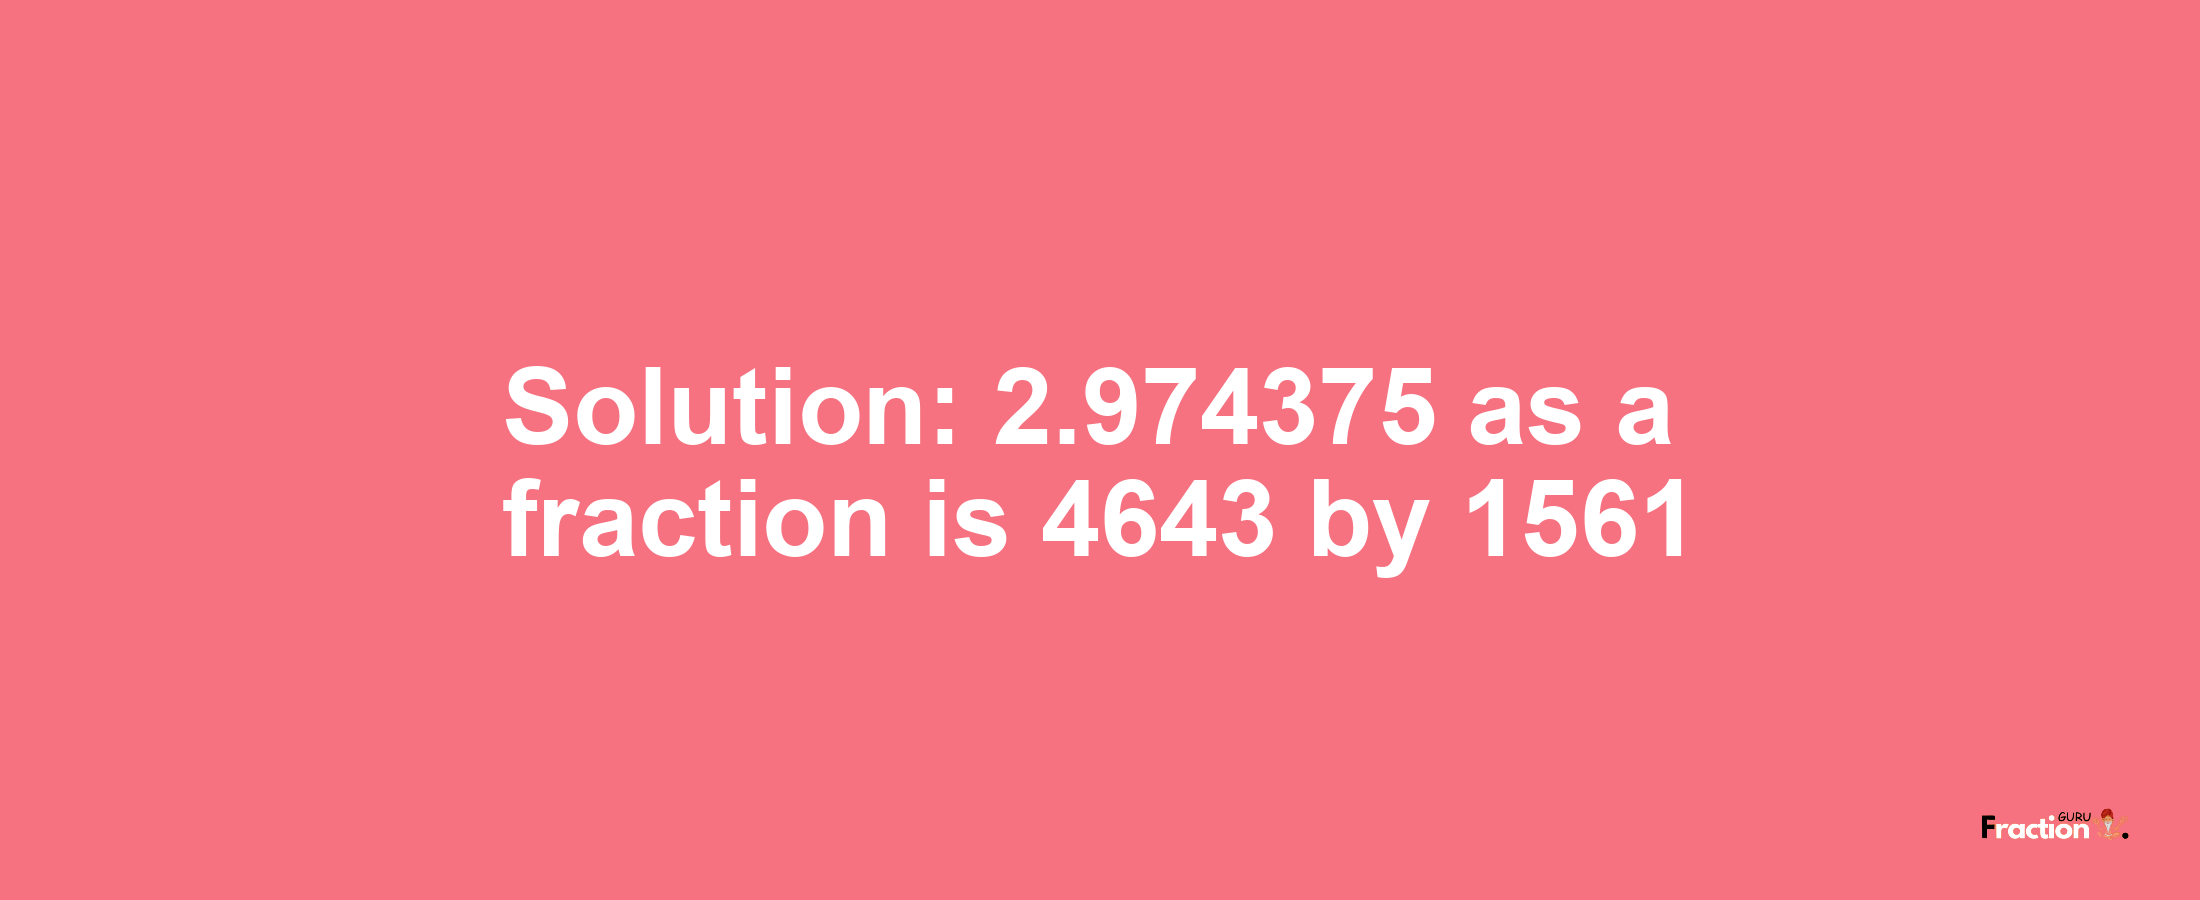 Solution:2.974375 as a fraction is 4643/1561